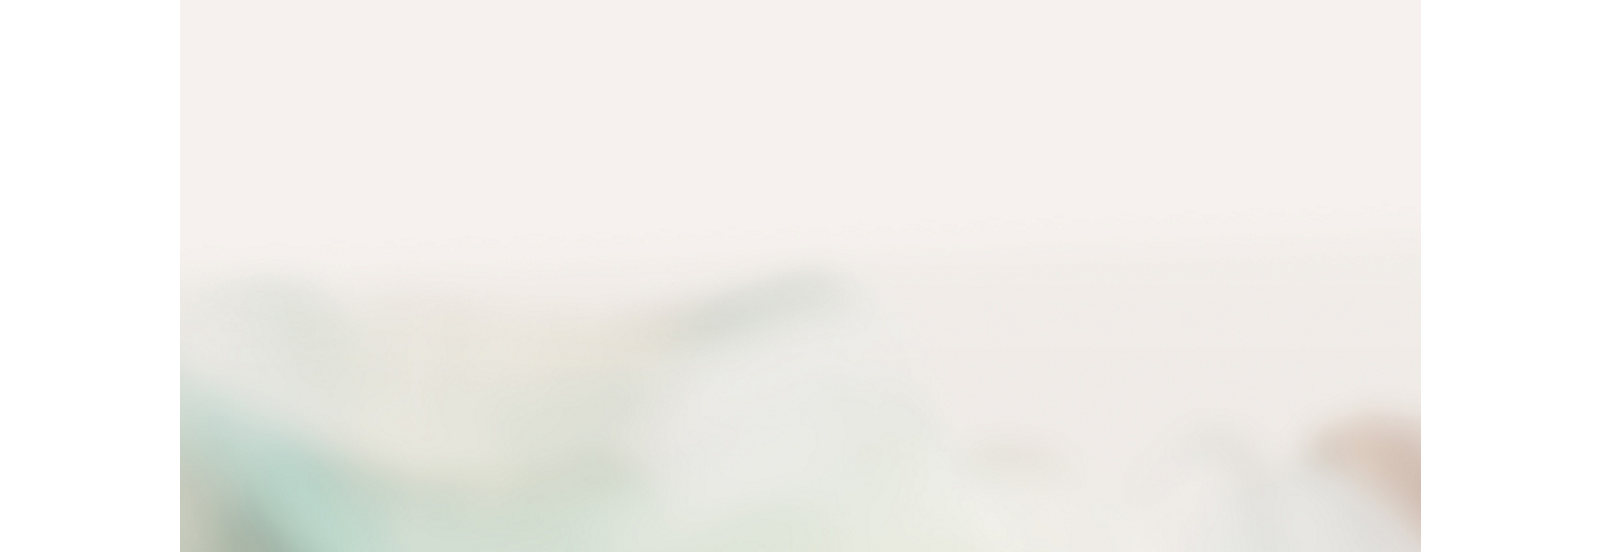 Blurred abstract background with soft pastel colors.